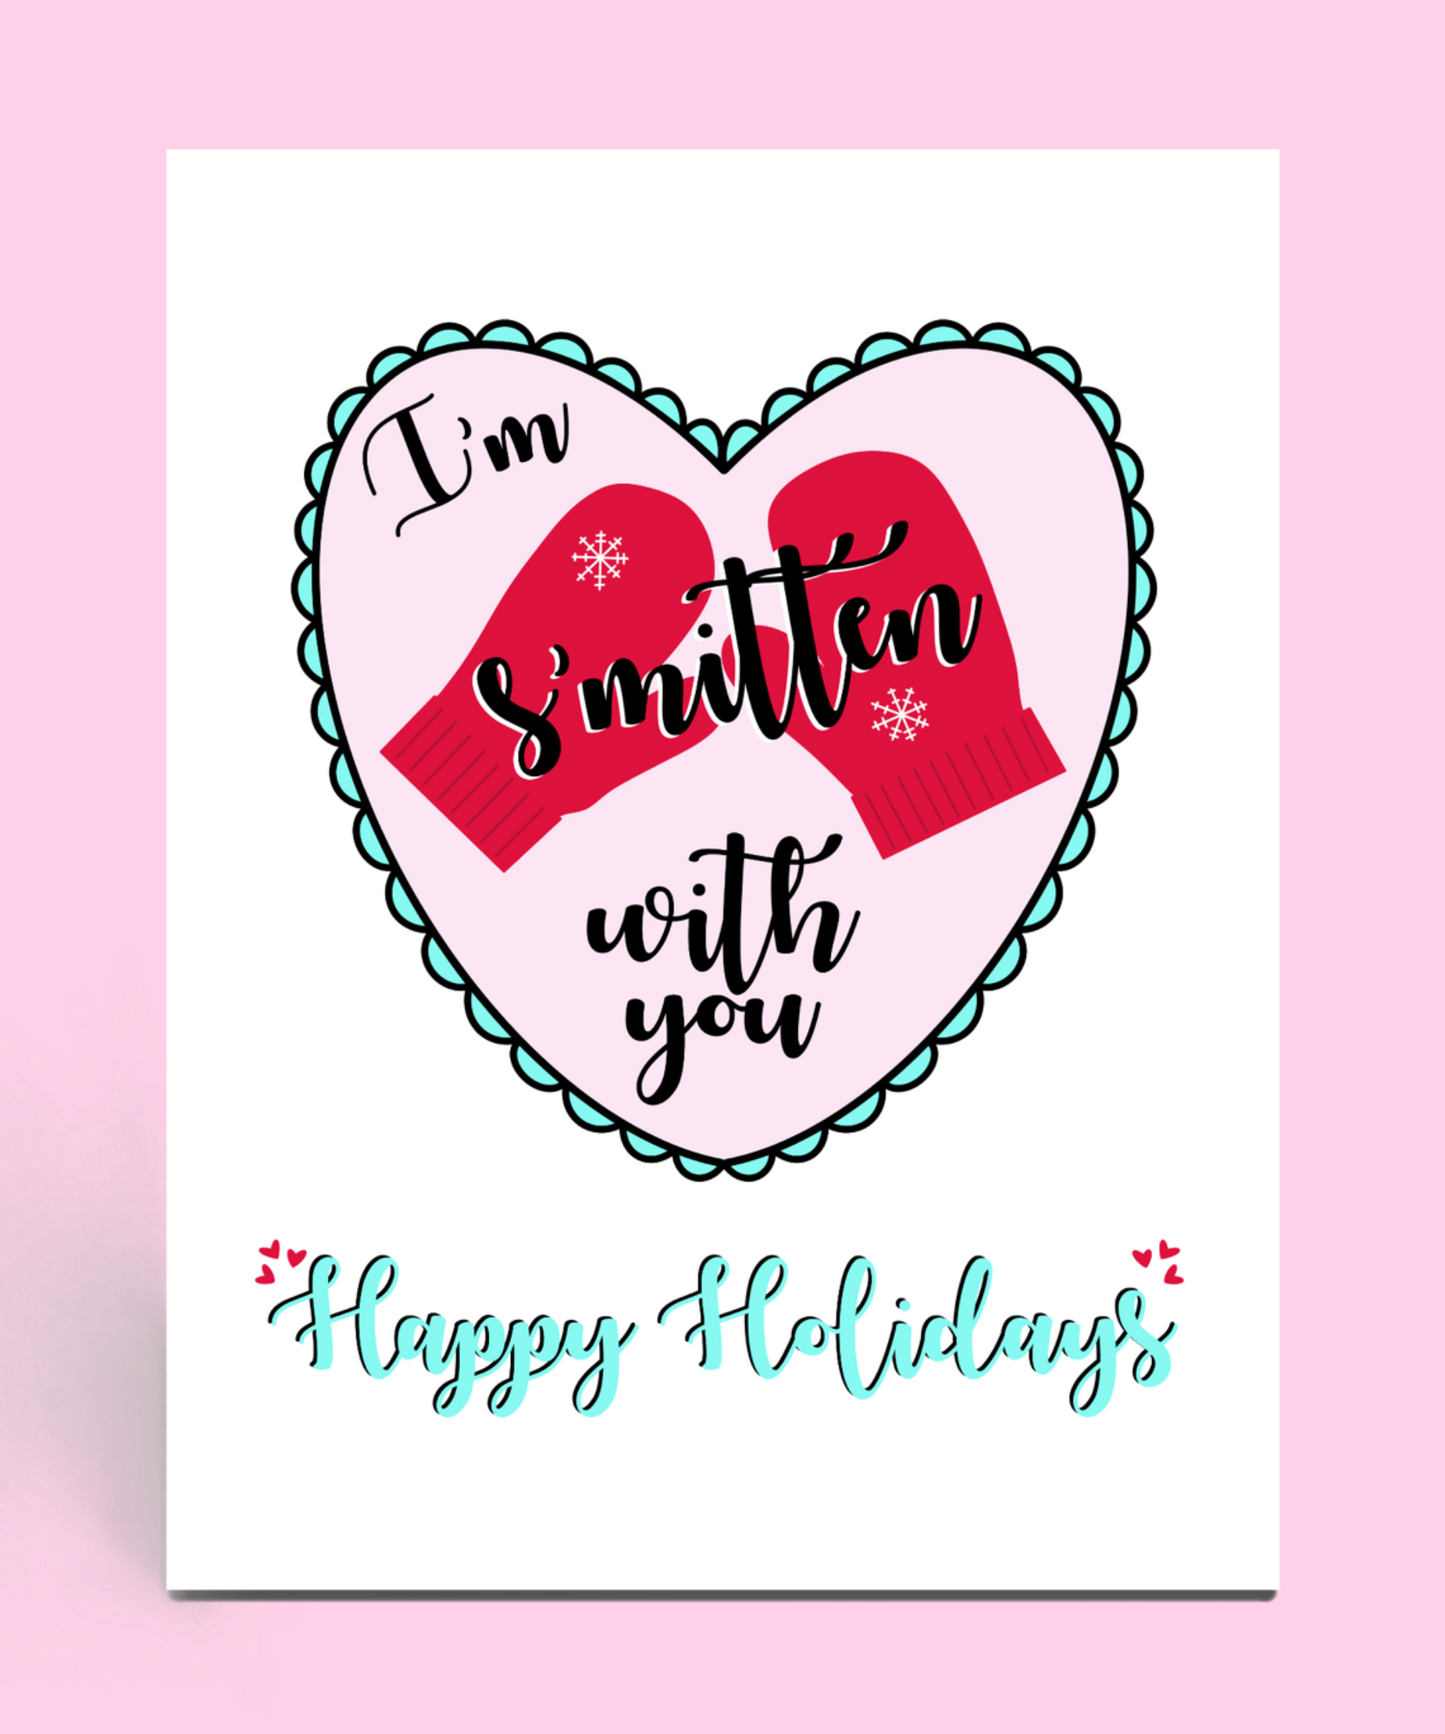 S'mitten With You Holiday Card